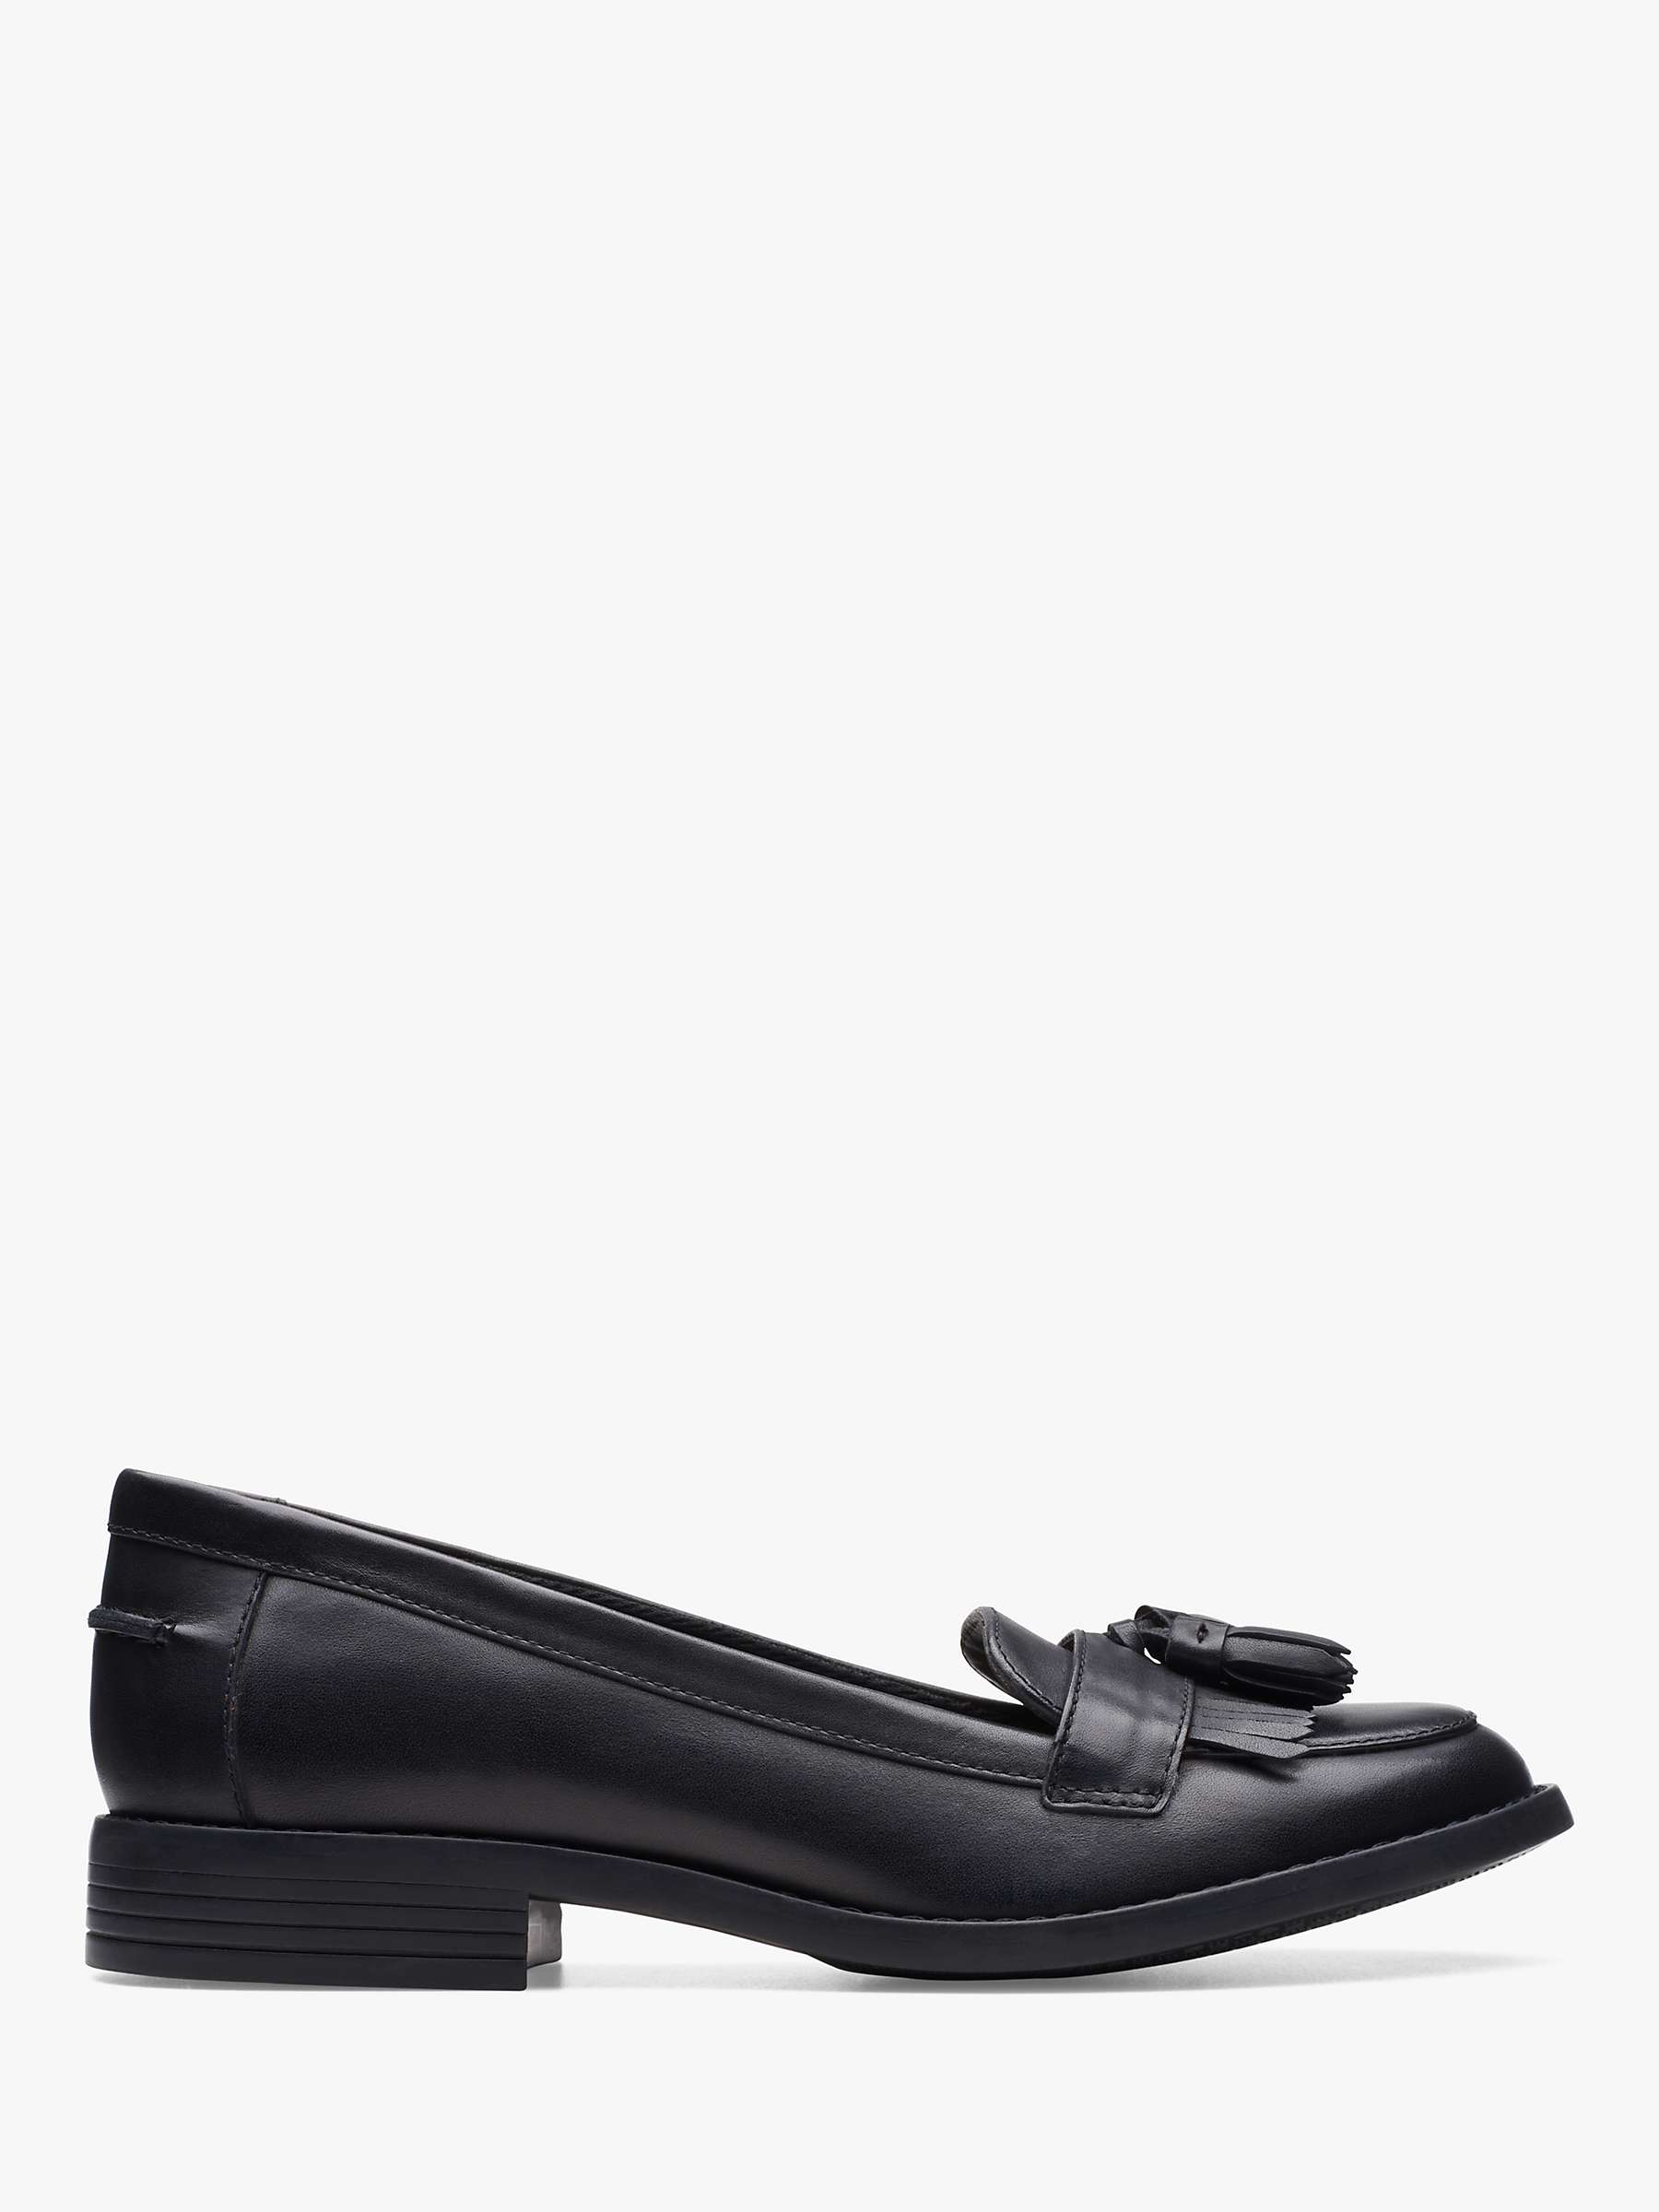 Clarks Camzin Leather Loafers, Black at John Lewis & Partners